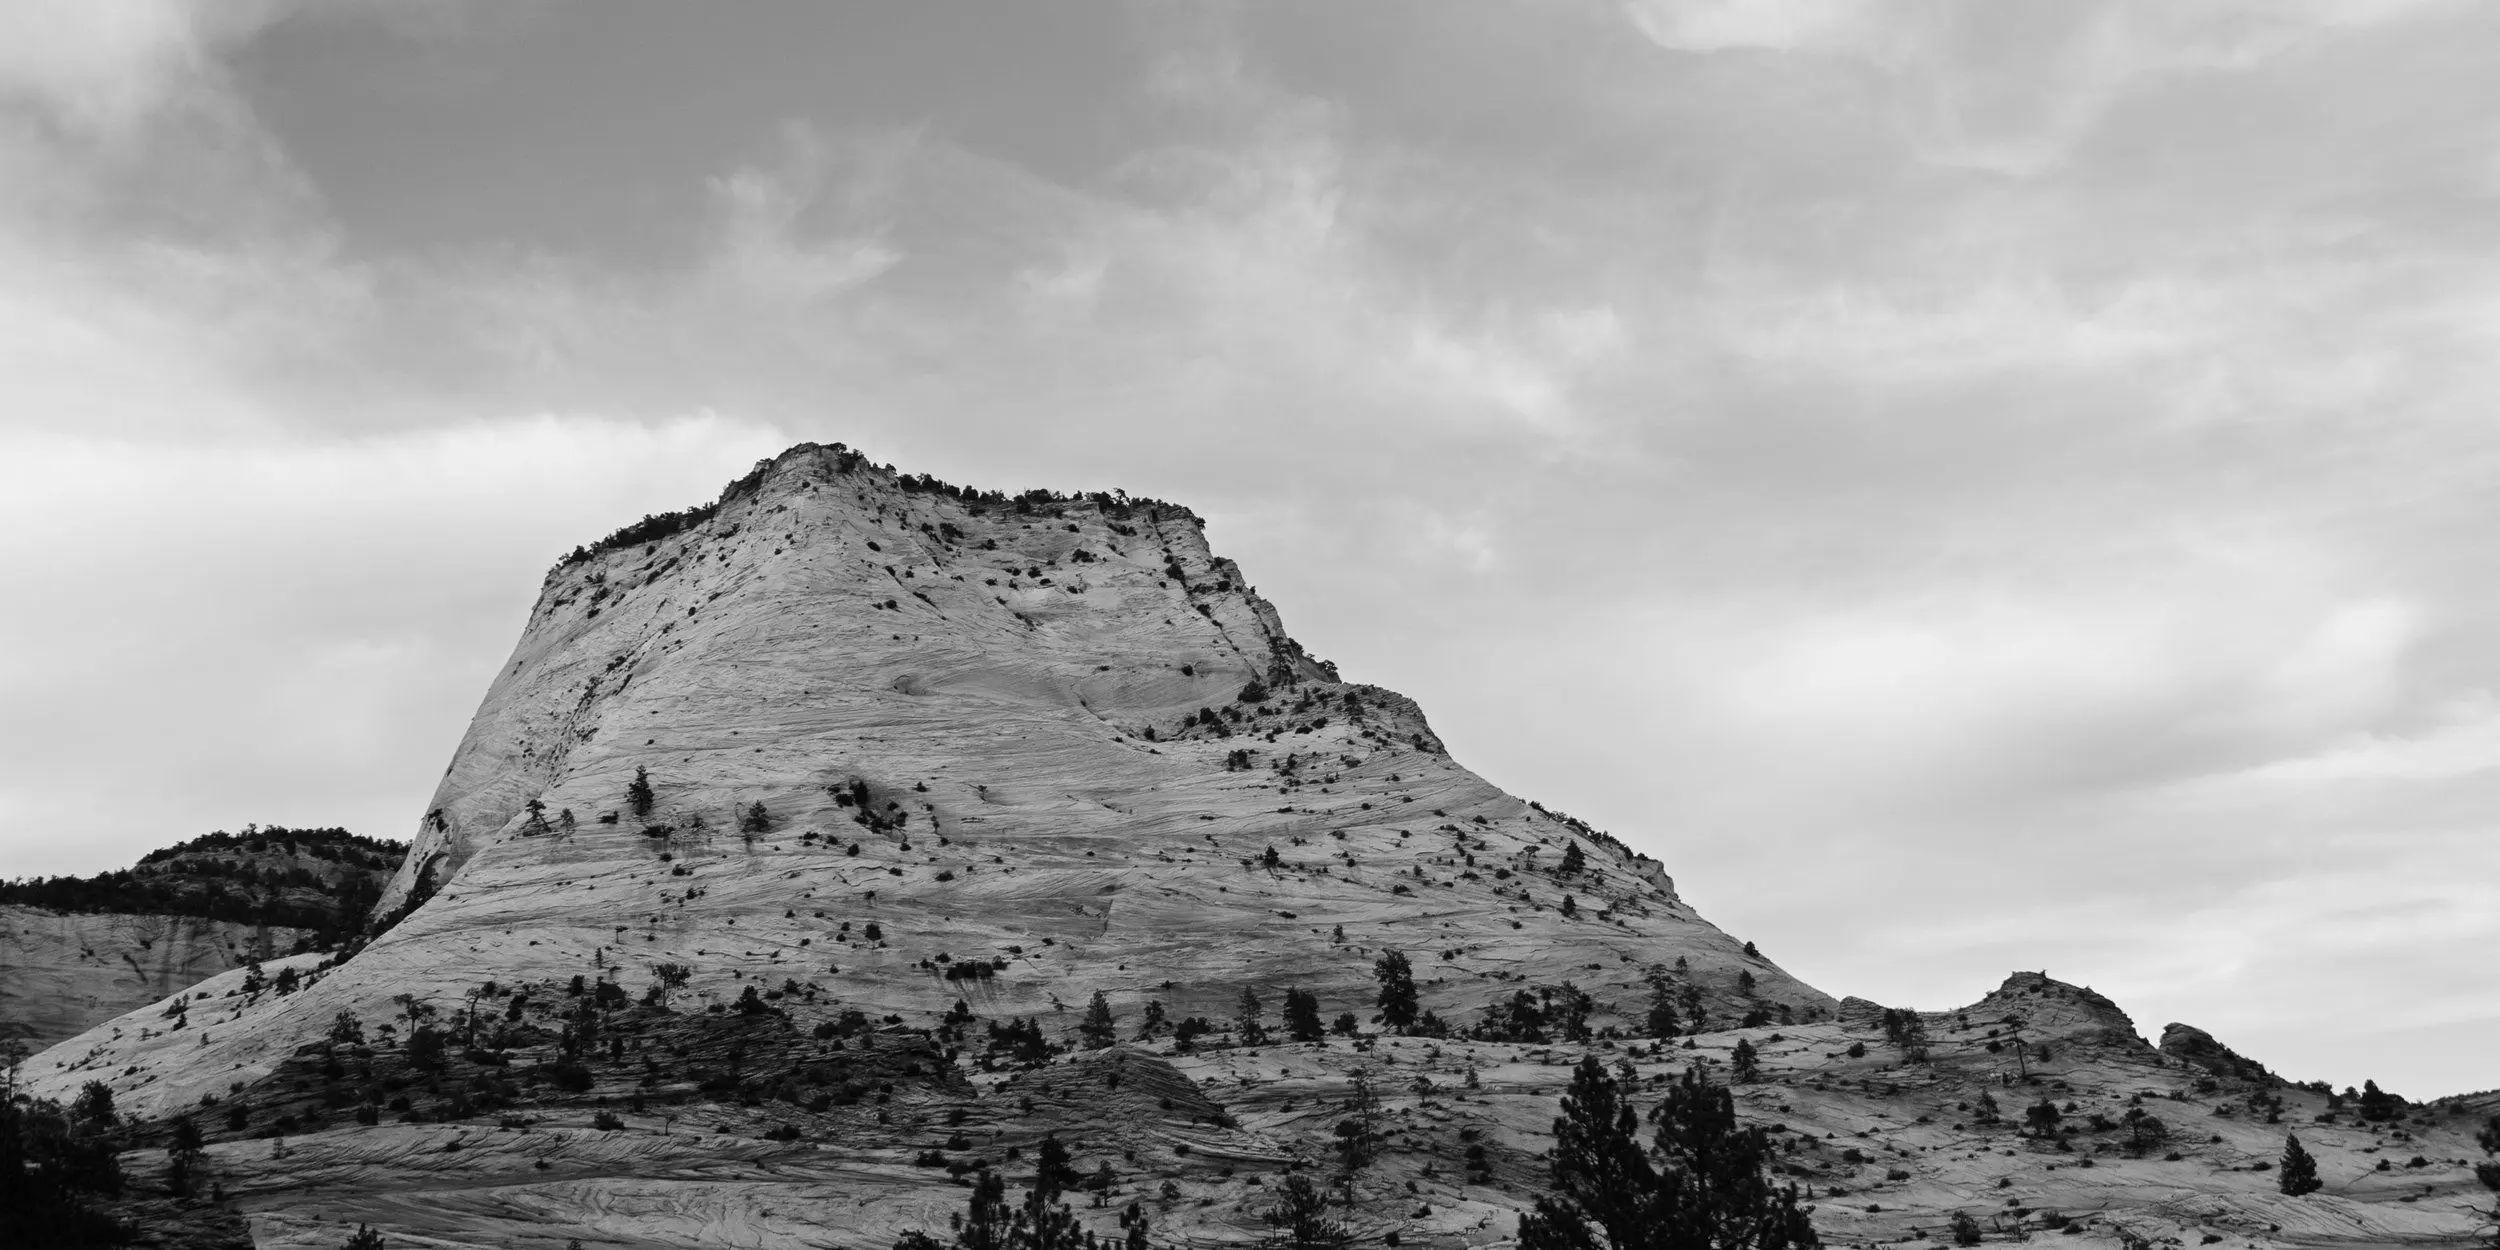 Black and white mountain on the Zion – Mount Carmel Highway.